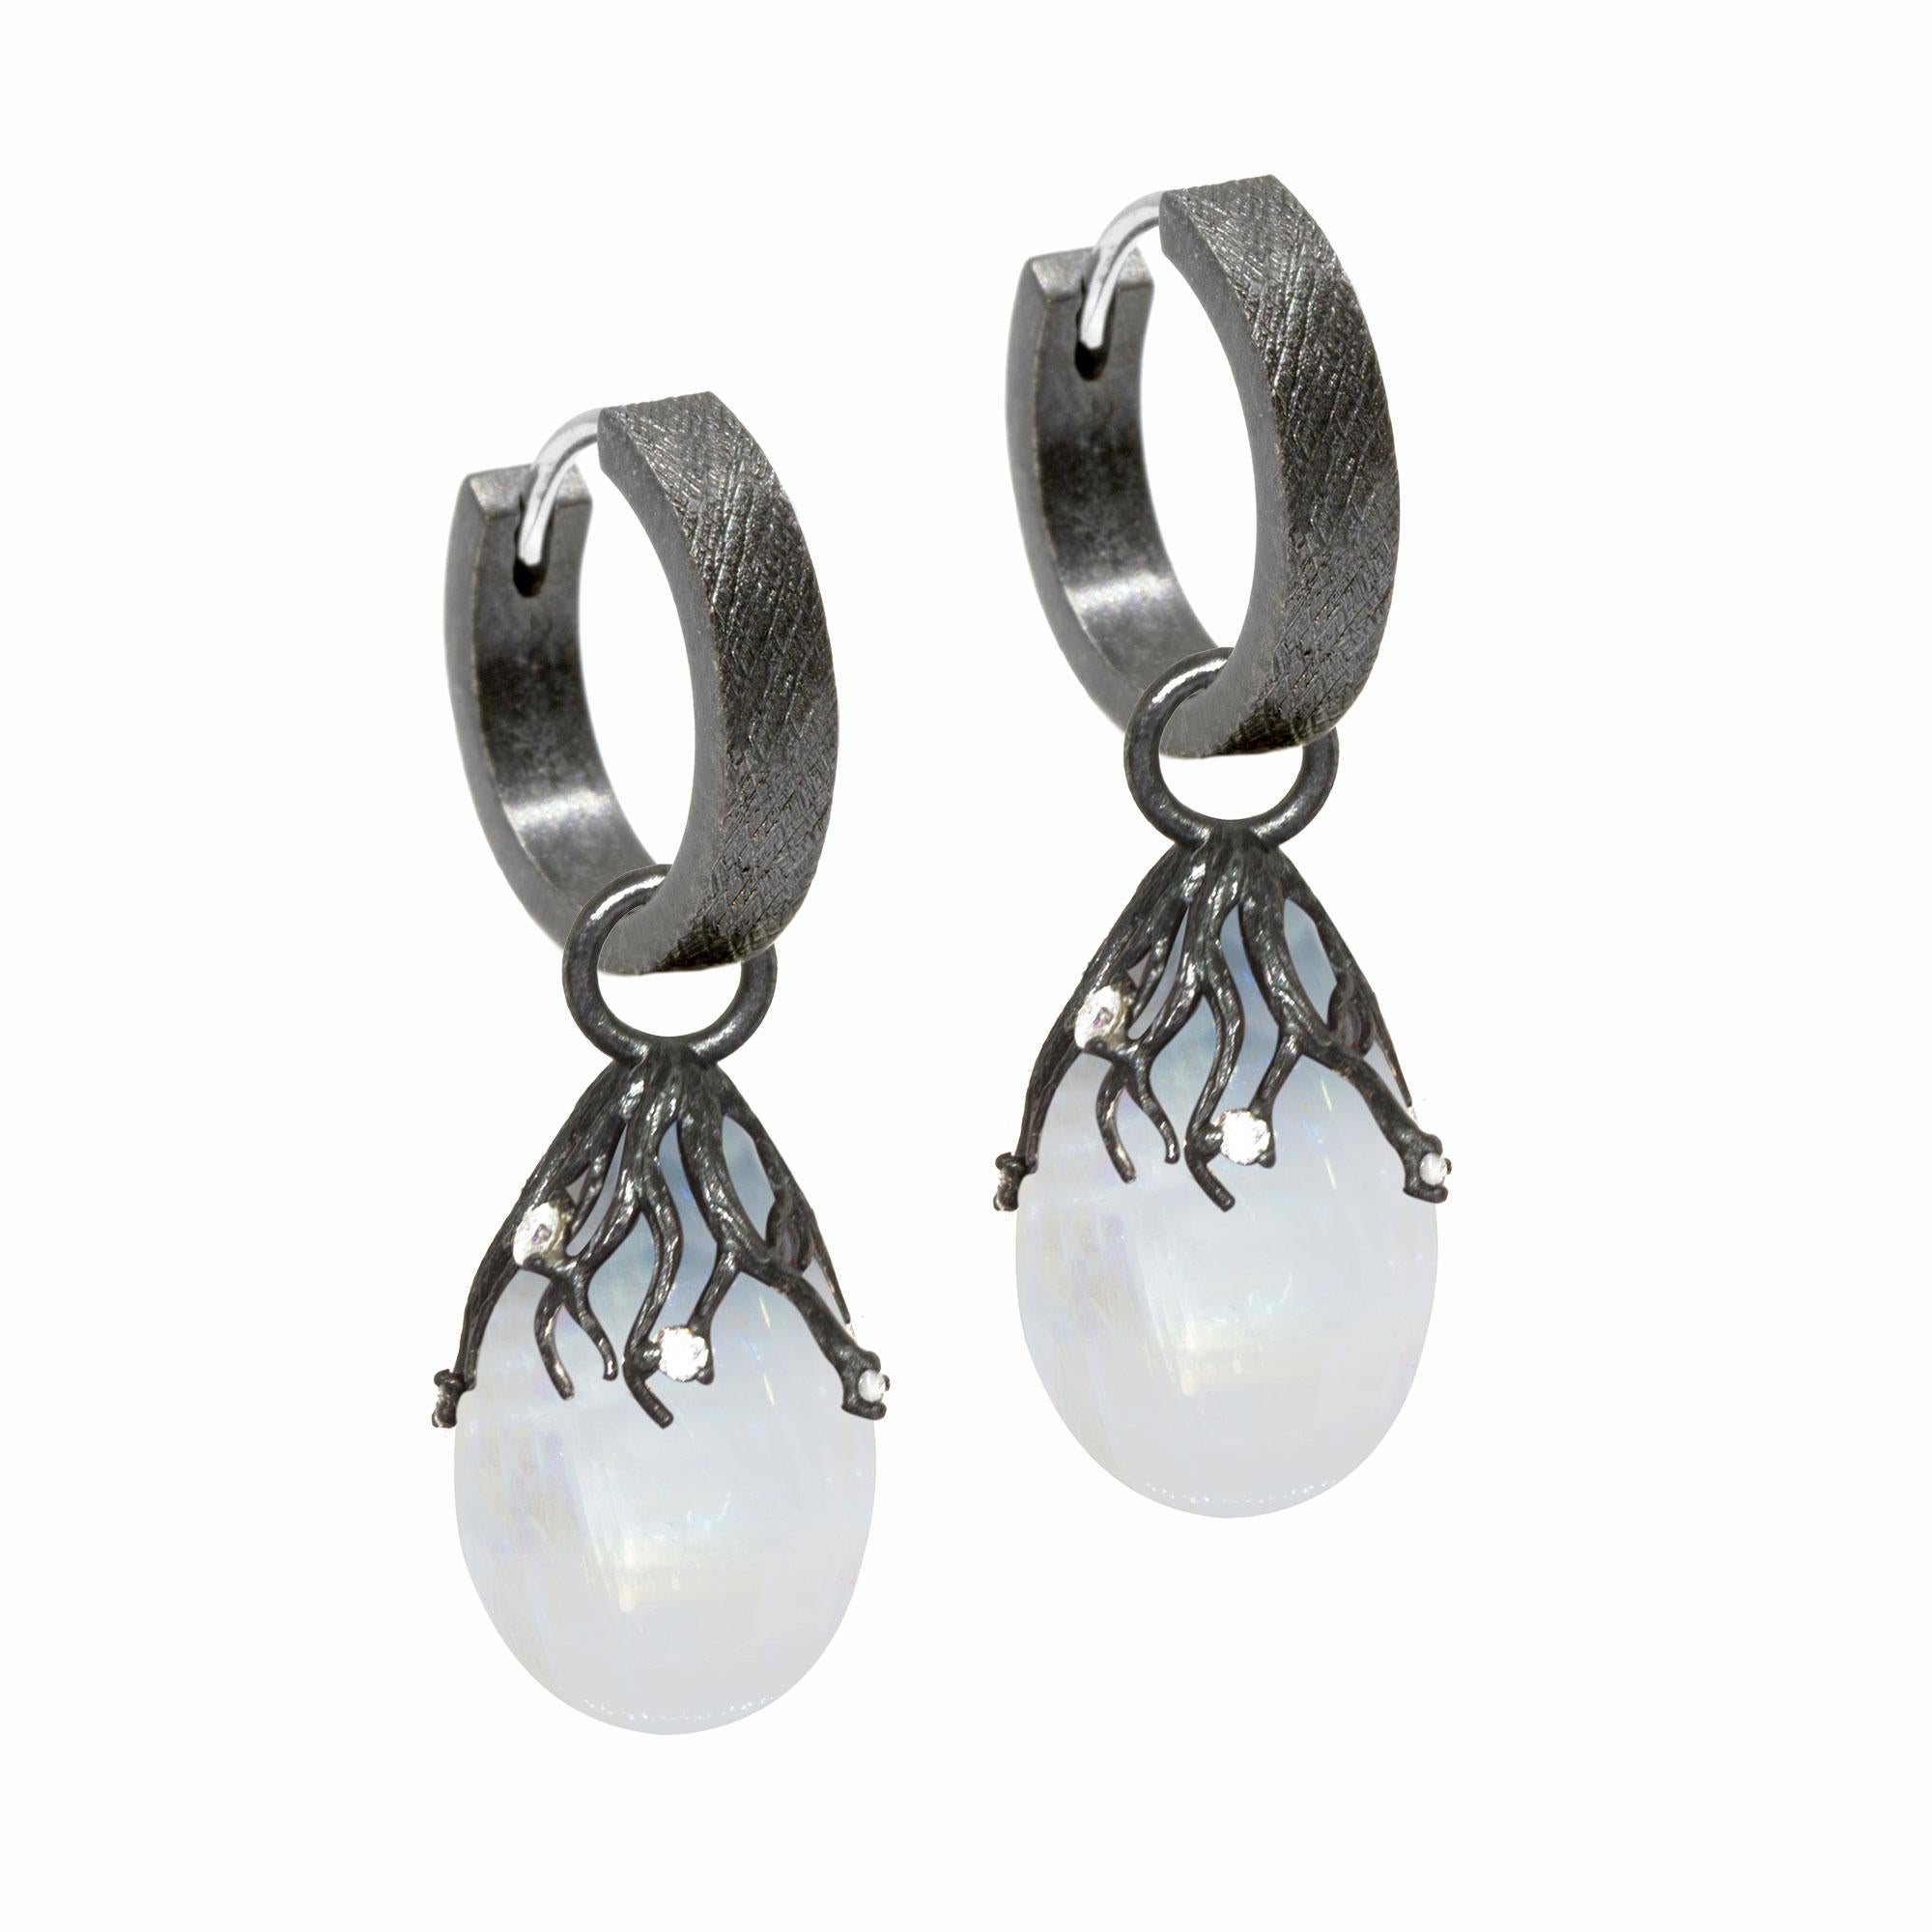 With rich, regal Moonstone, our Rooted Silver Earring Charms make the perfect addition to any hoops or charms.
Nina Nguyen Design's patent-pending earrings have an element on the back of the stud or charm to allow these pieces to transformed into